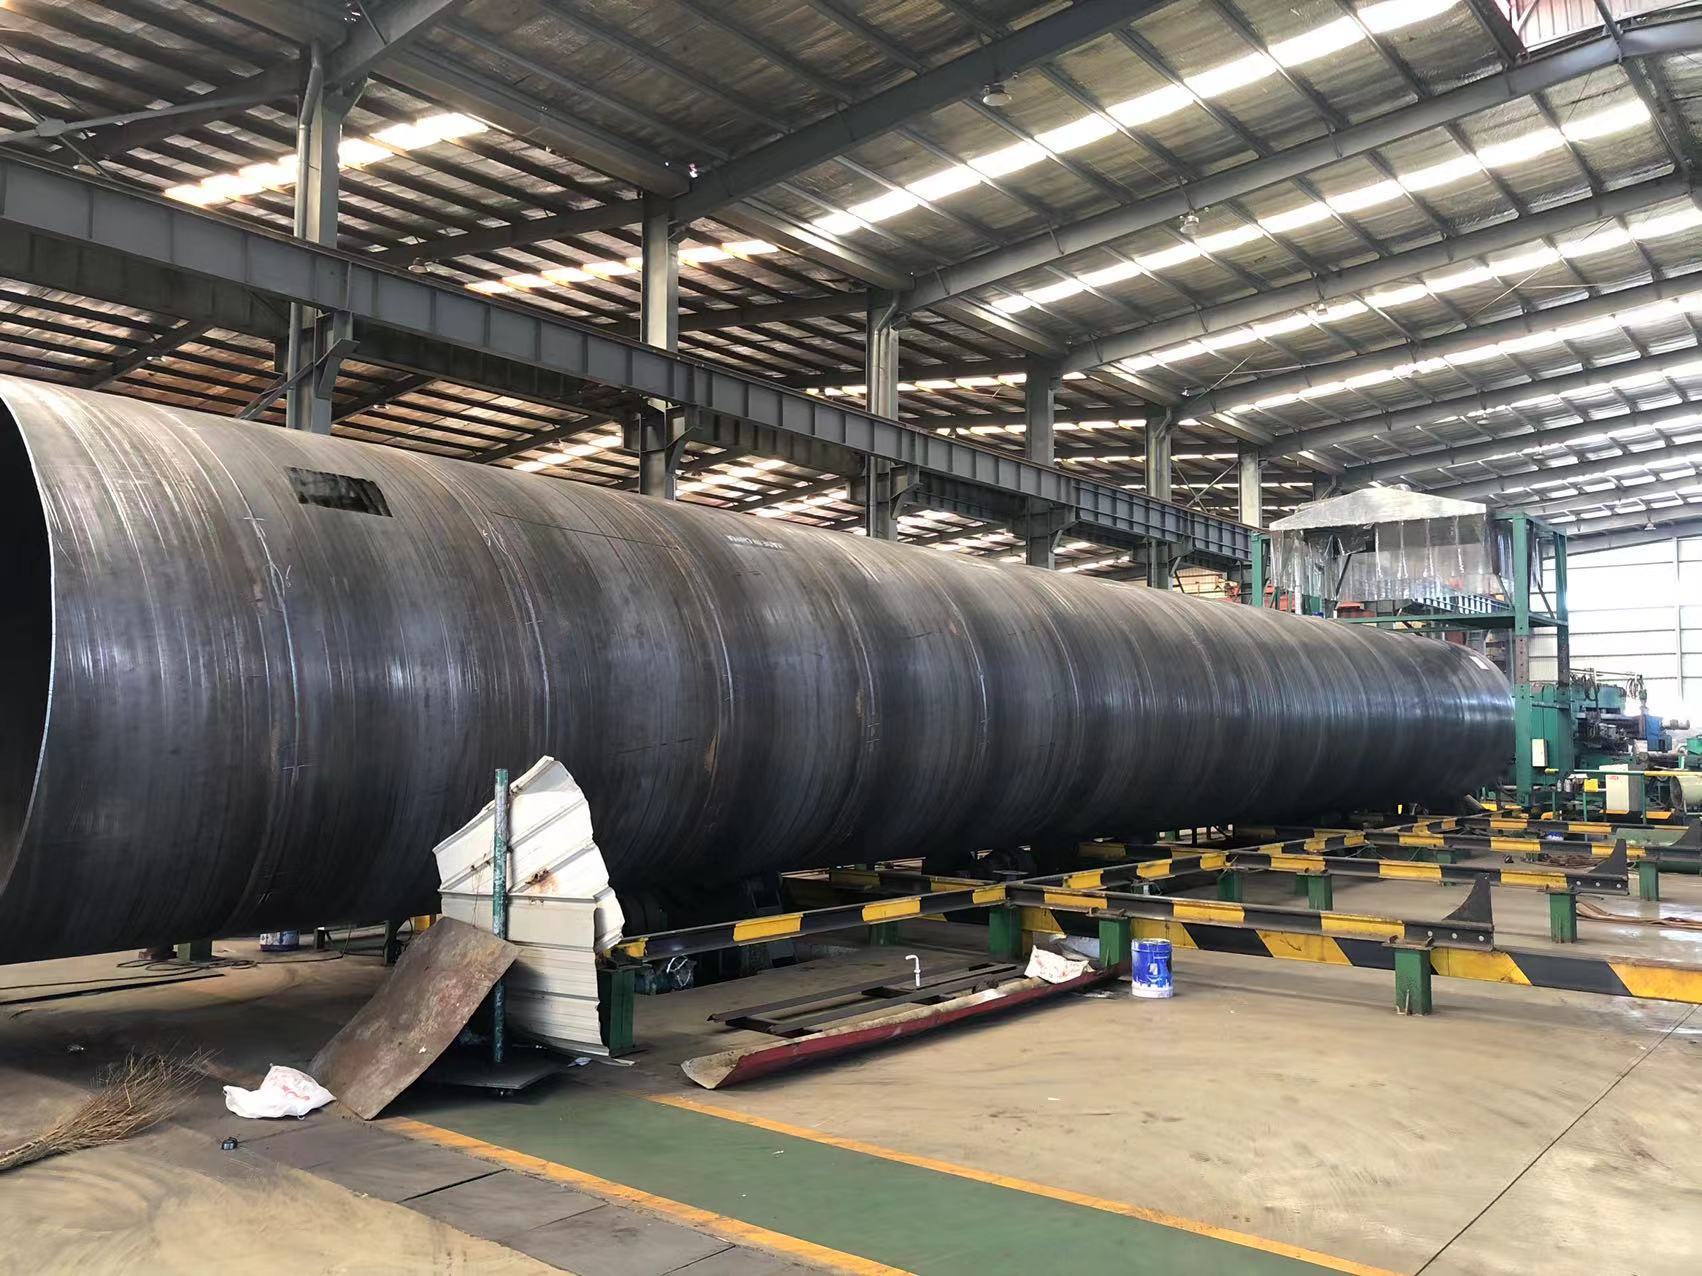 What are the advantages of double-sided submerged arc welded pipe?